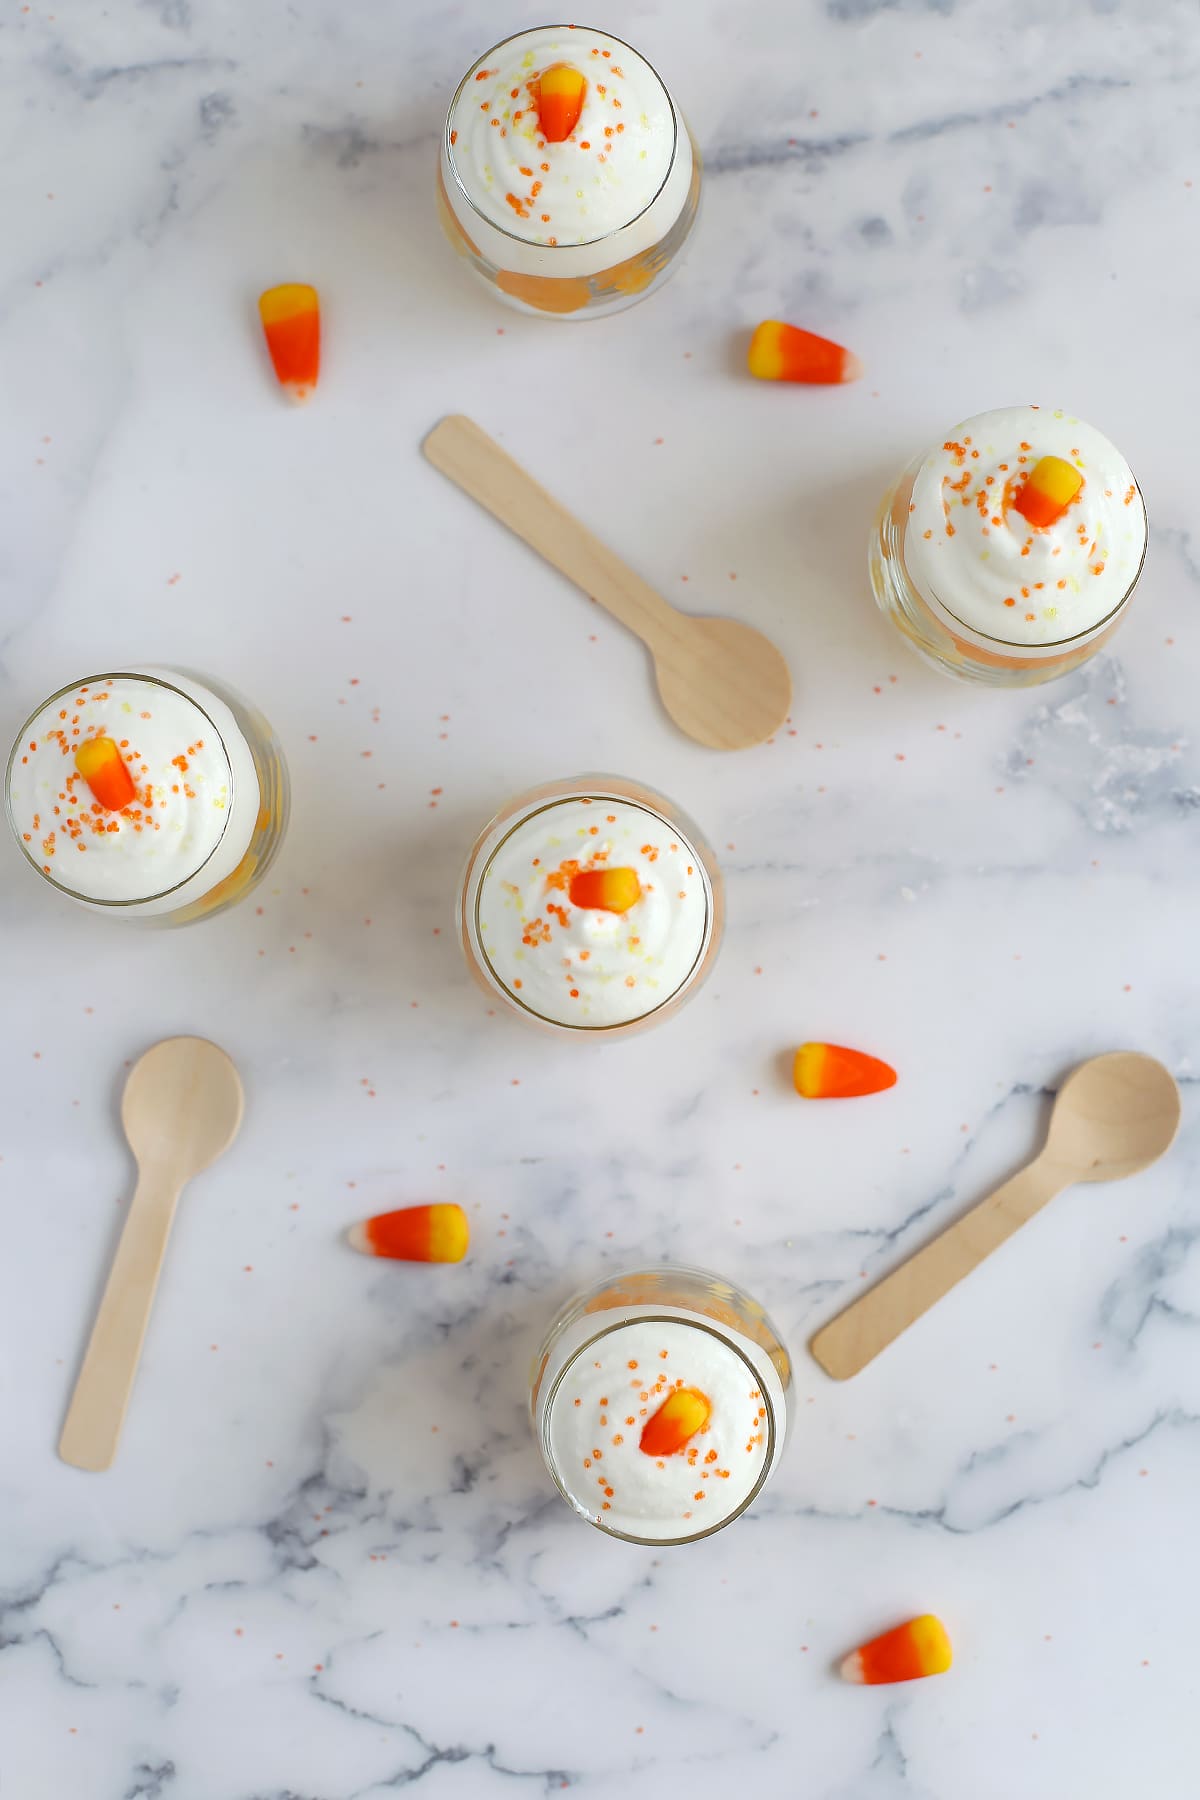 Little candy corn parfaits topped with whipped cottage cheese, orange and yellow sprinkles, and a candy corn.